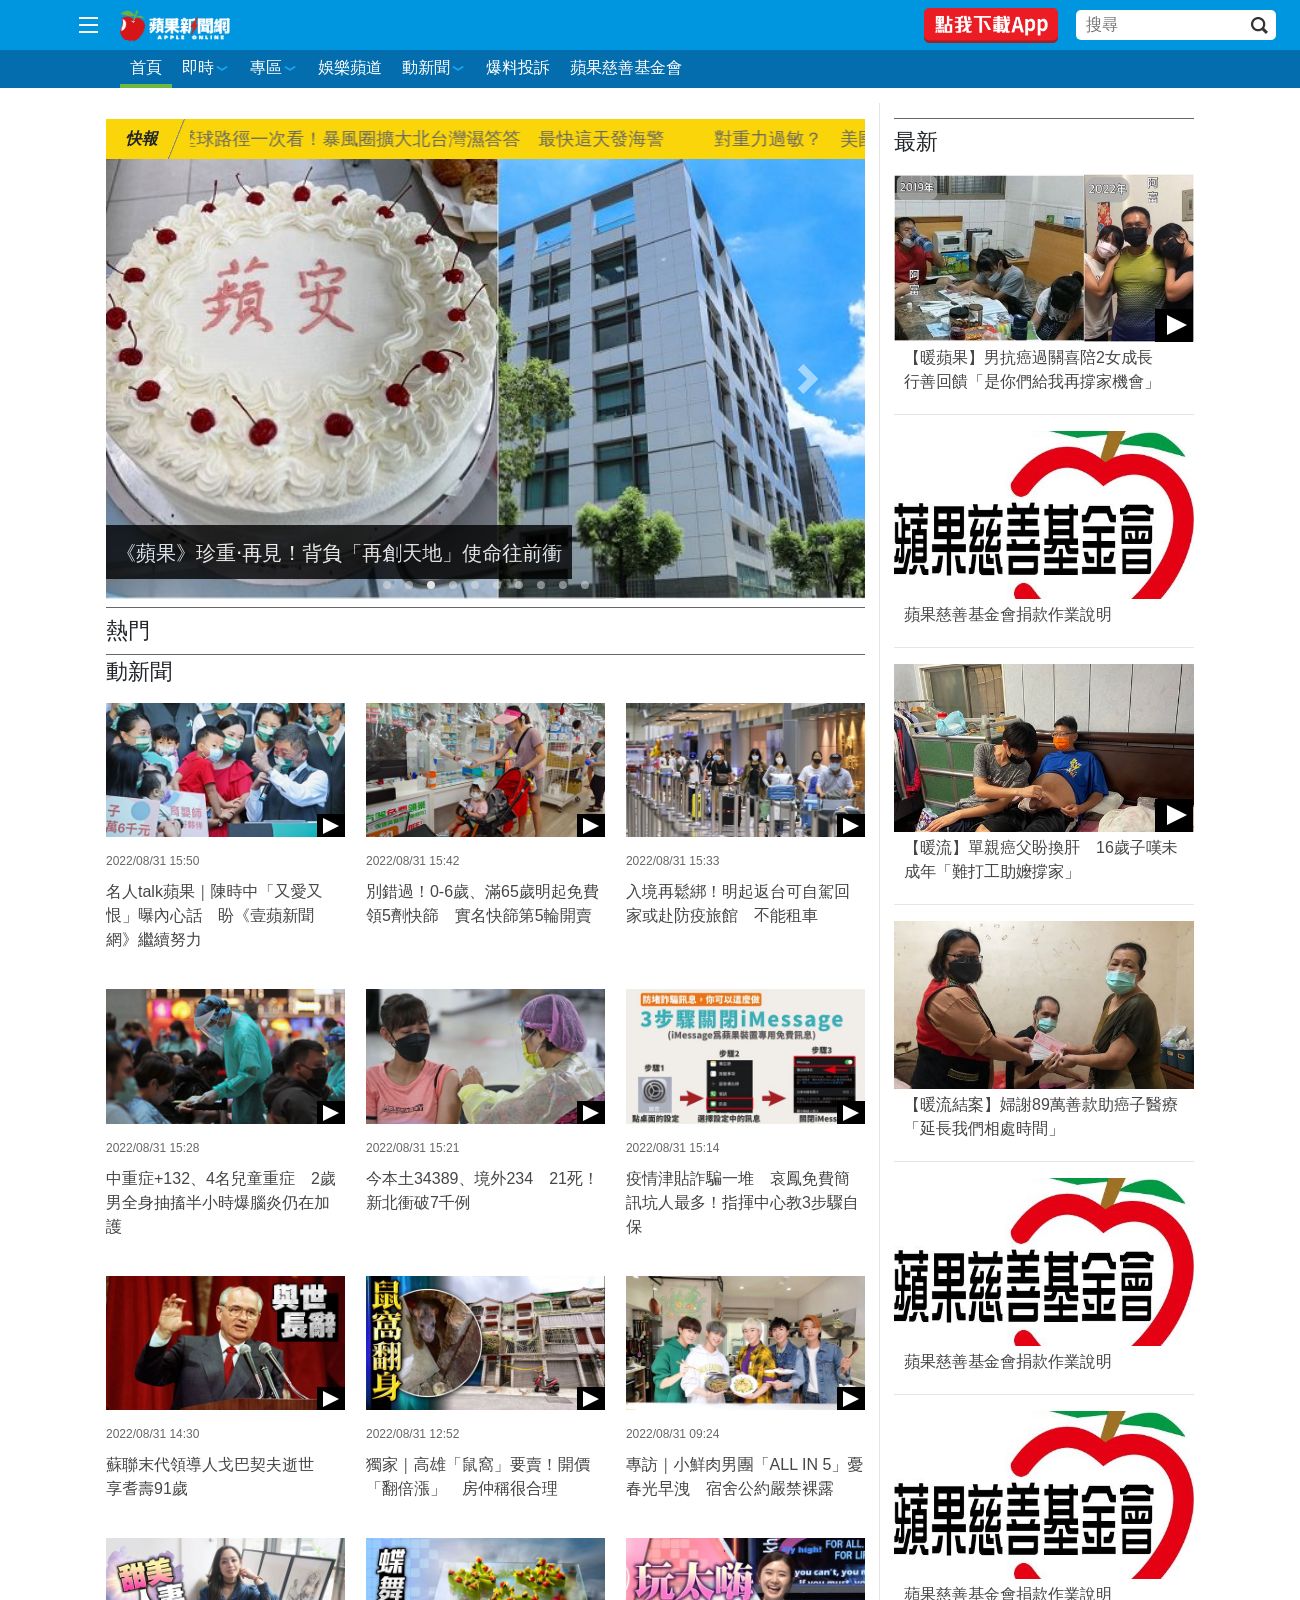 Apple Daily at 2022-09-15 10:29:40+08:00 local time